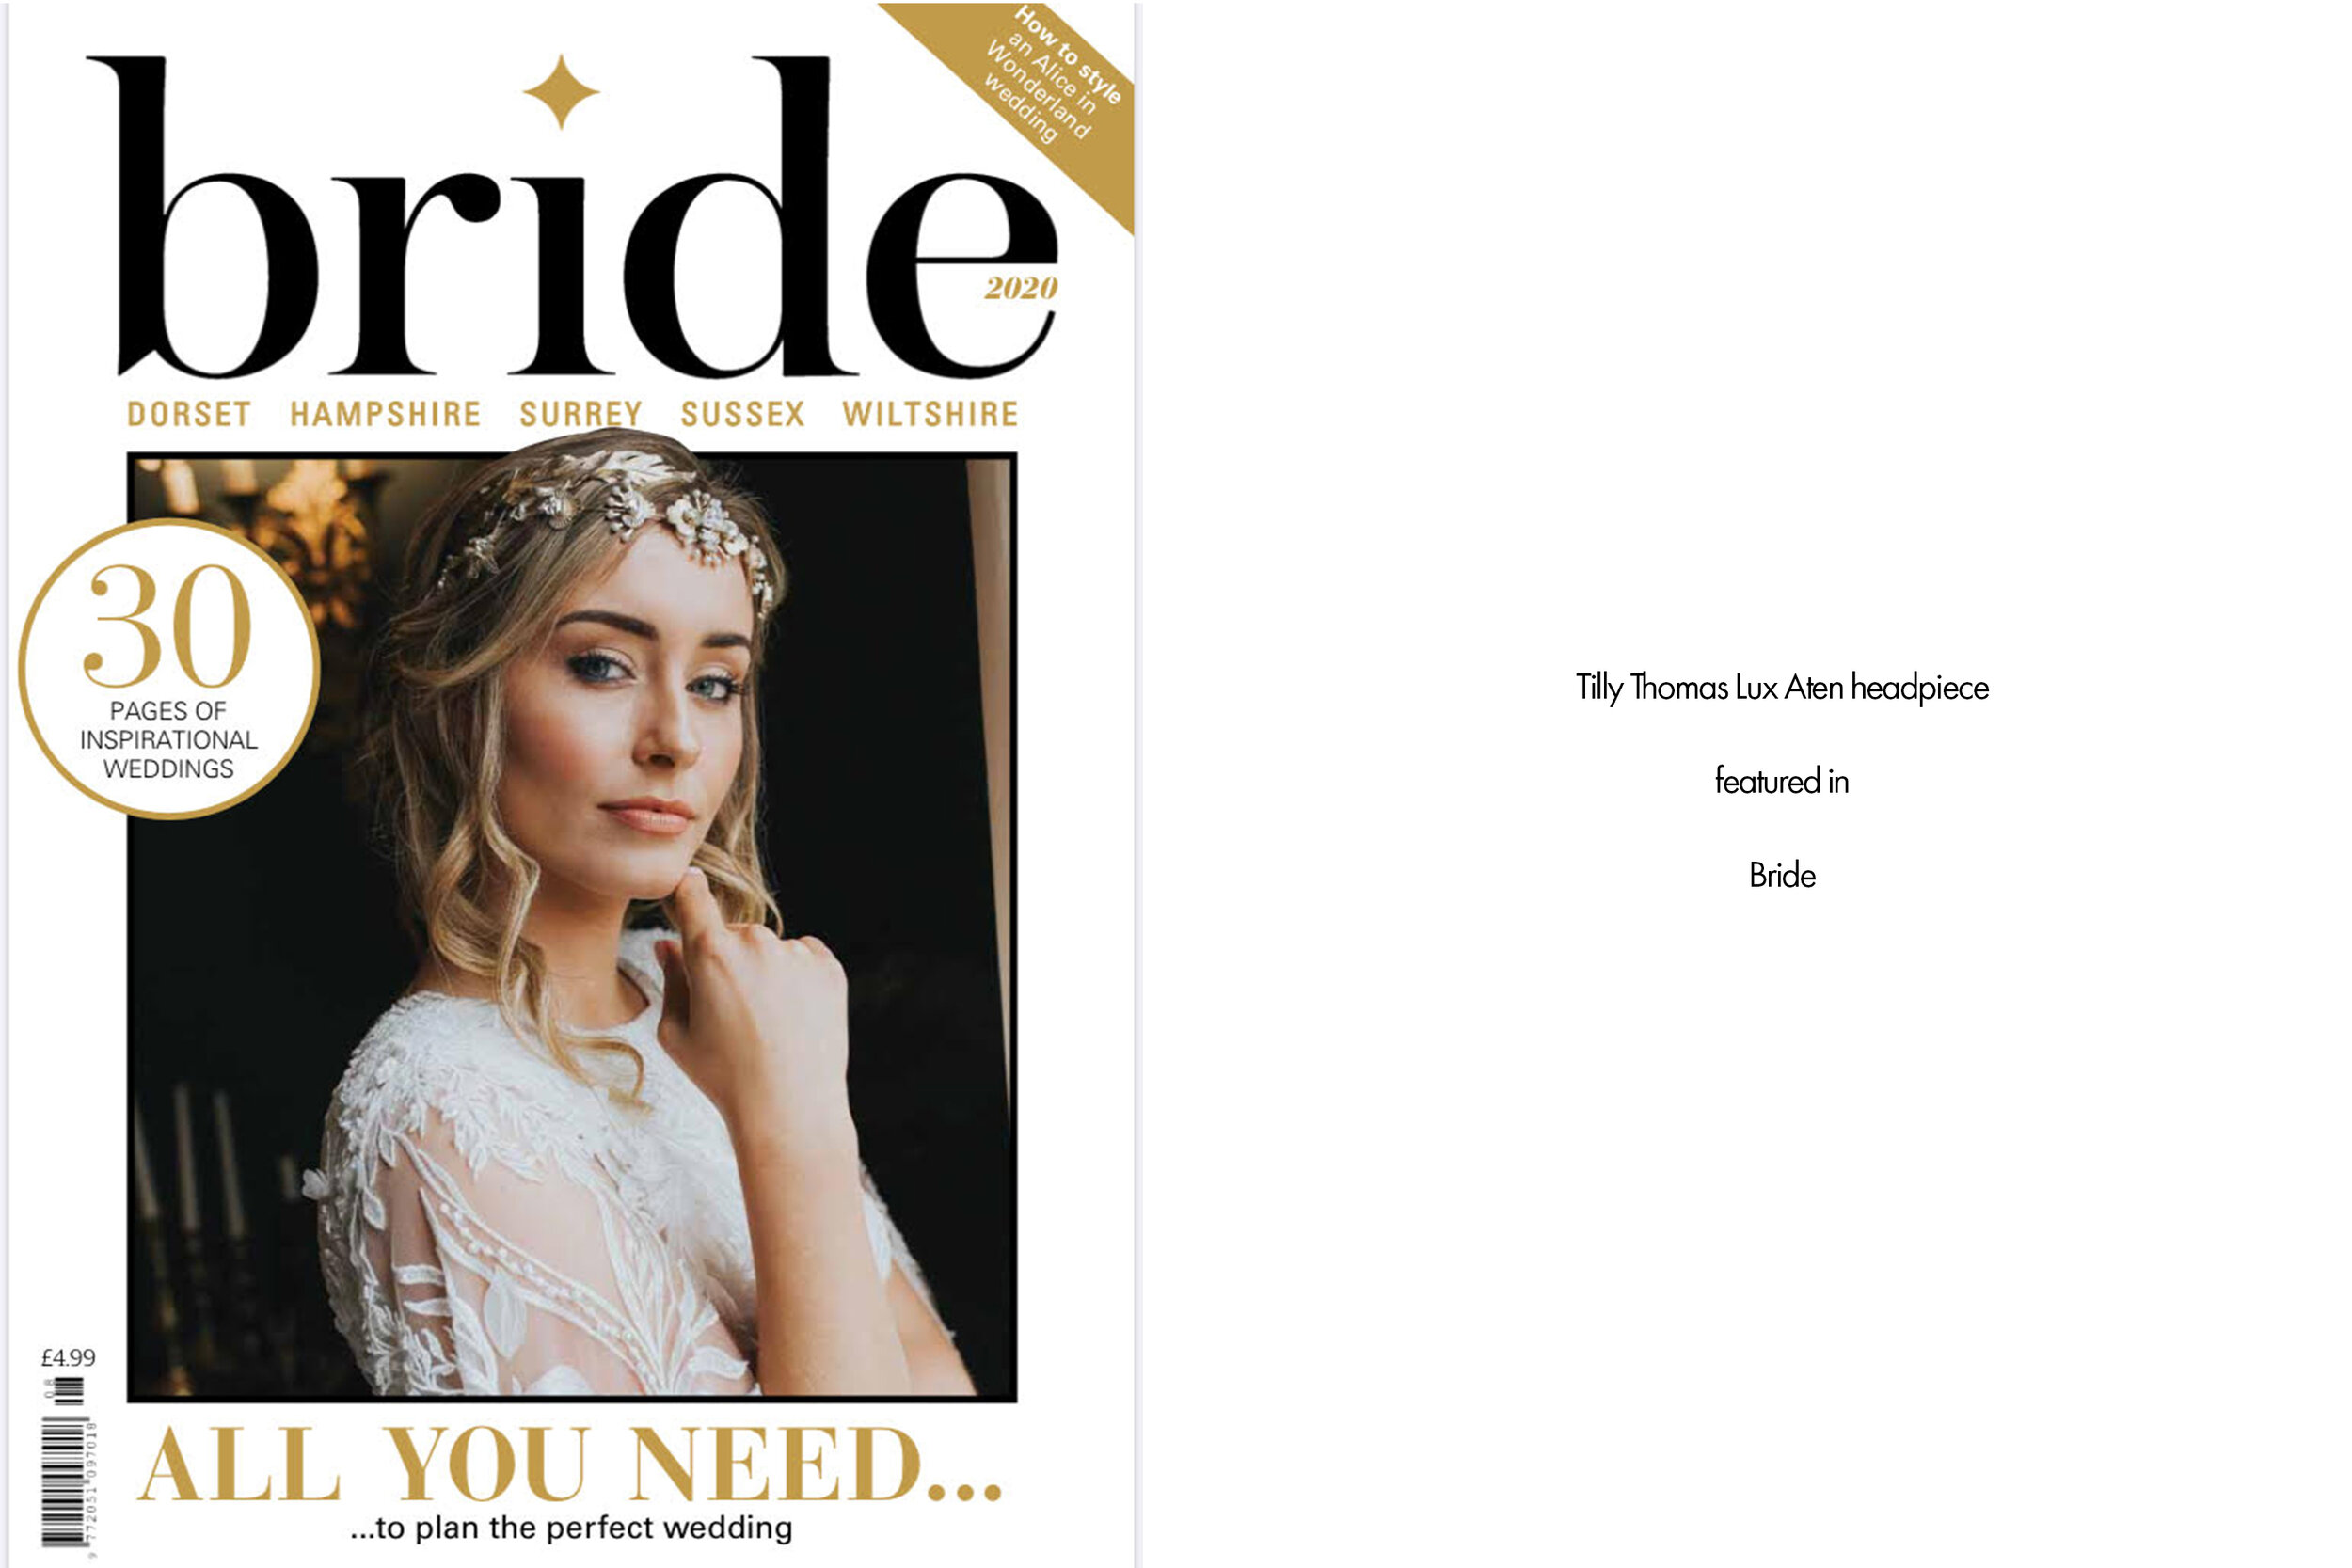 Tilly Thomas Lux featured in Bride